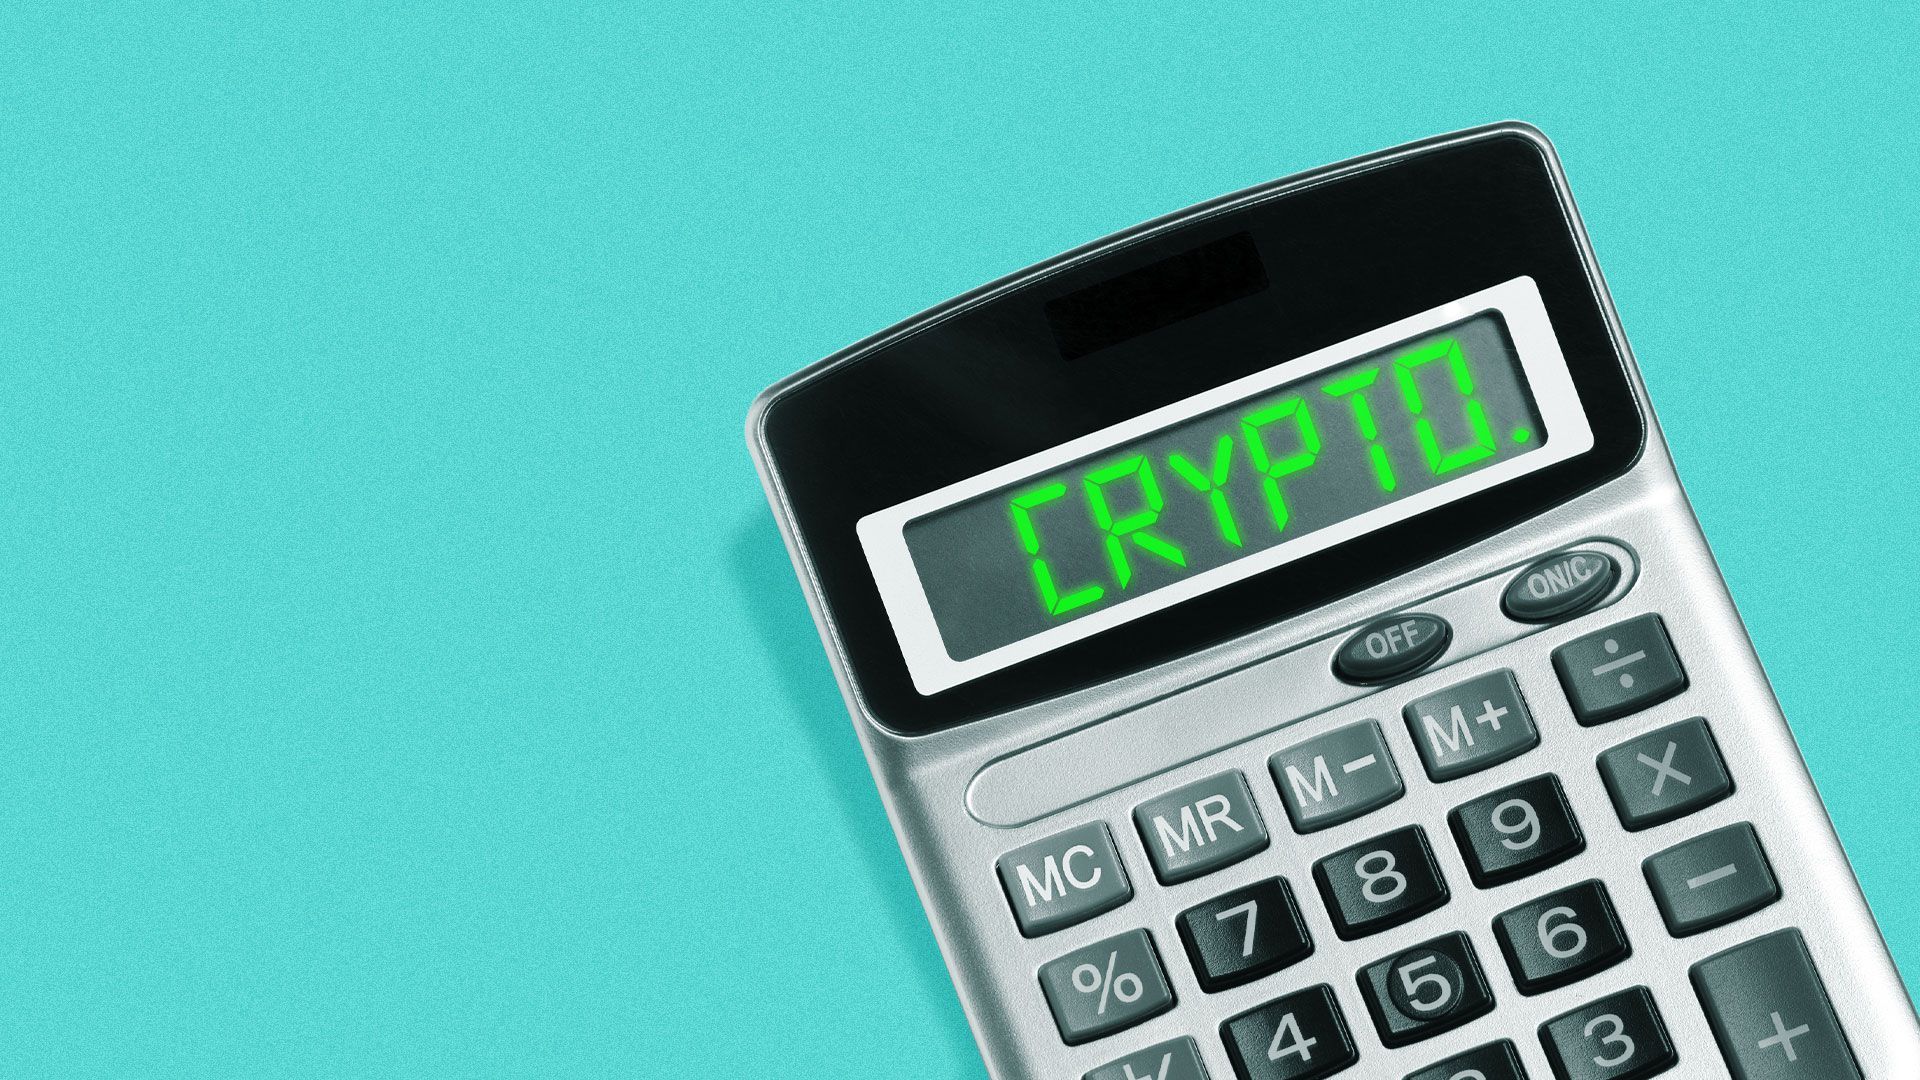 Illustration of a calculator with bright green text reading "crypto" on the screen.